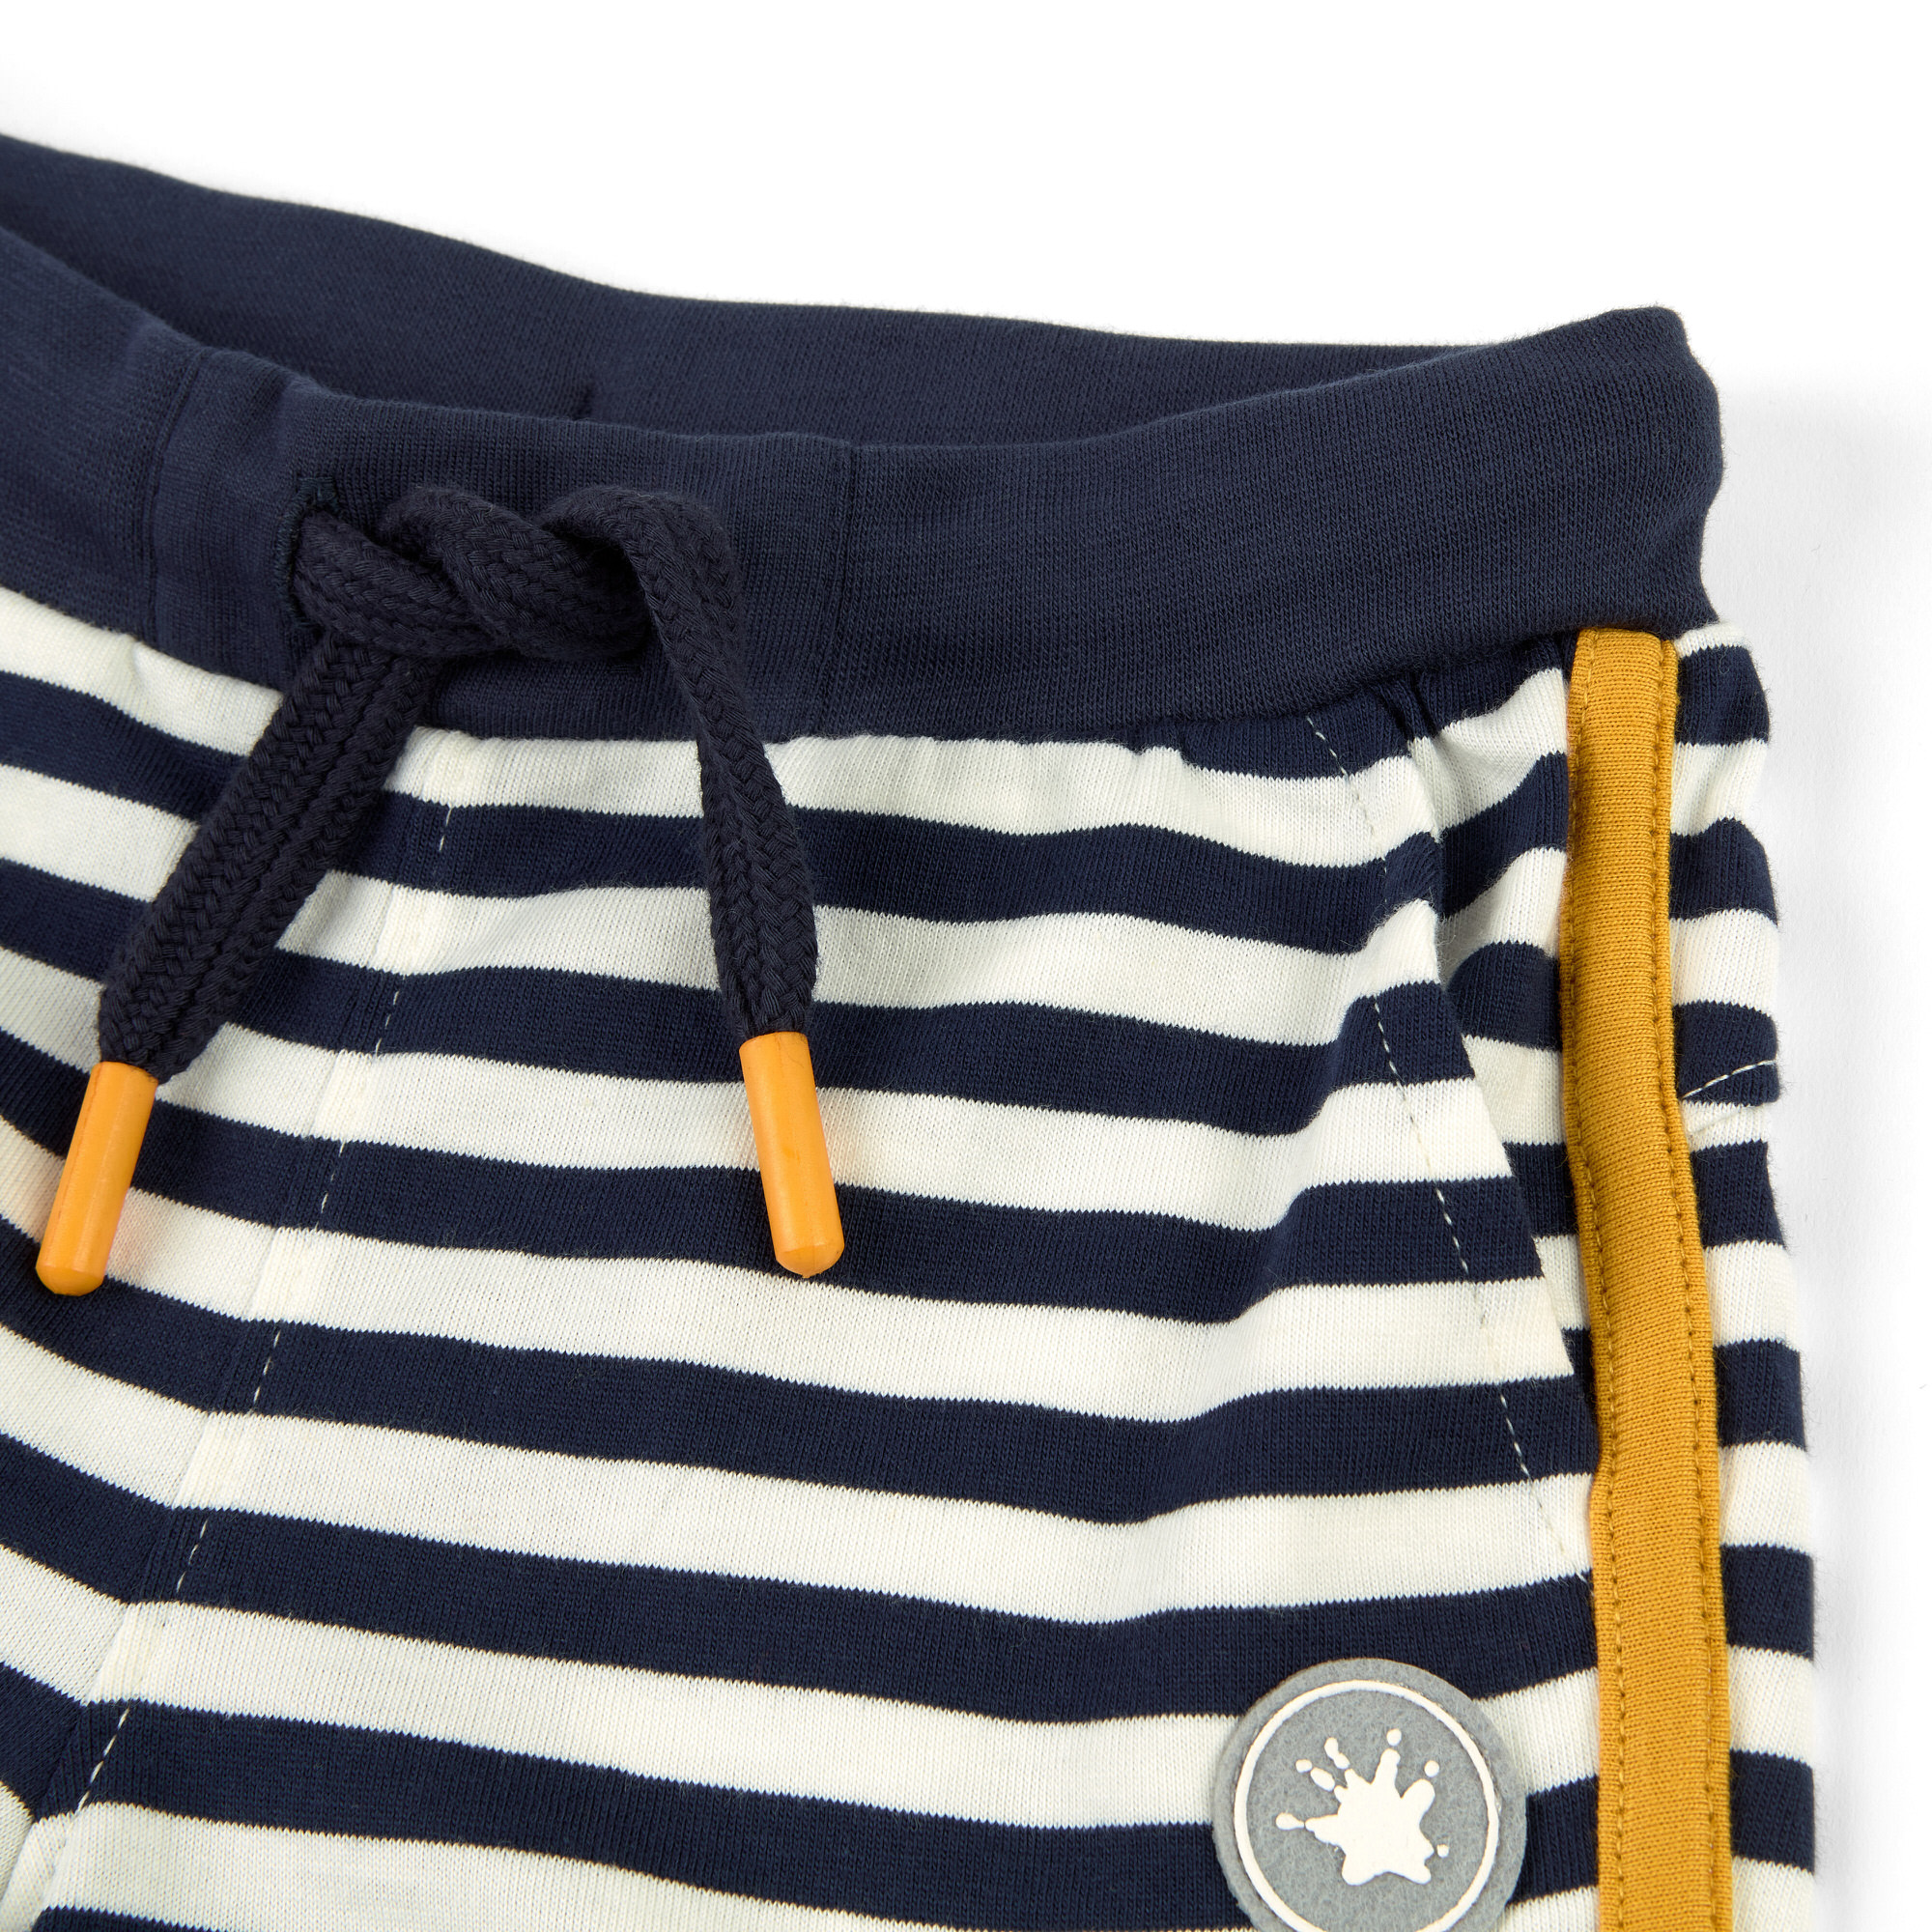 Striped children's short jersey pants navy/white with pockets,